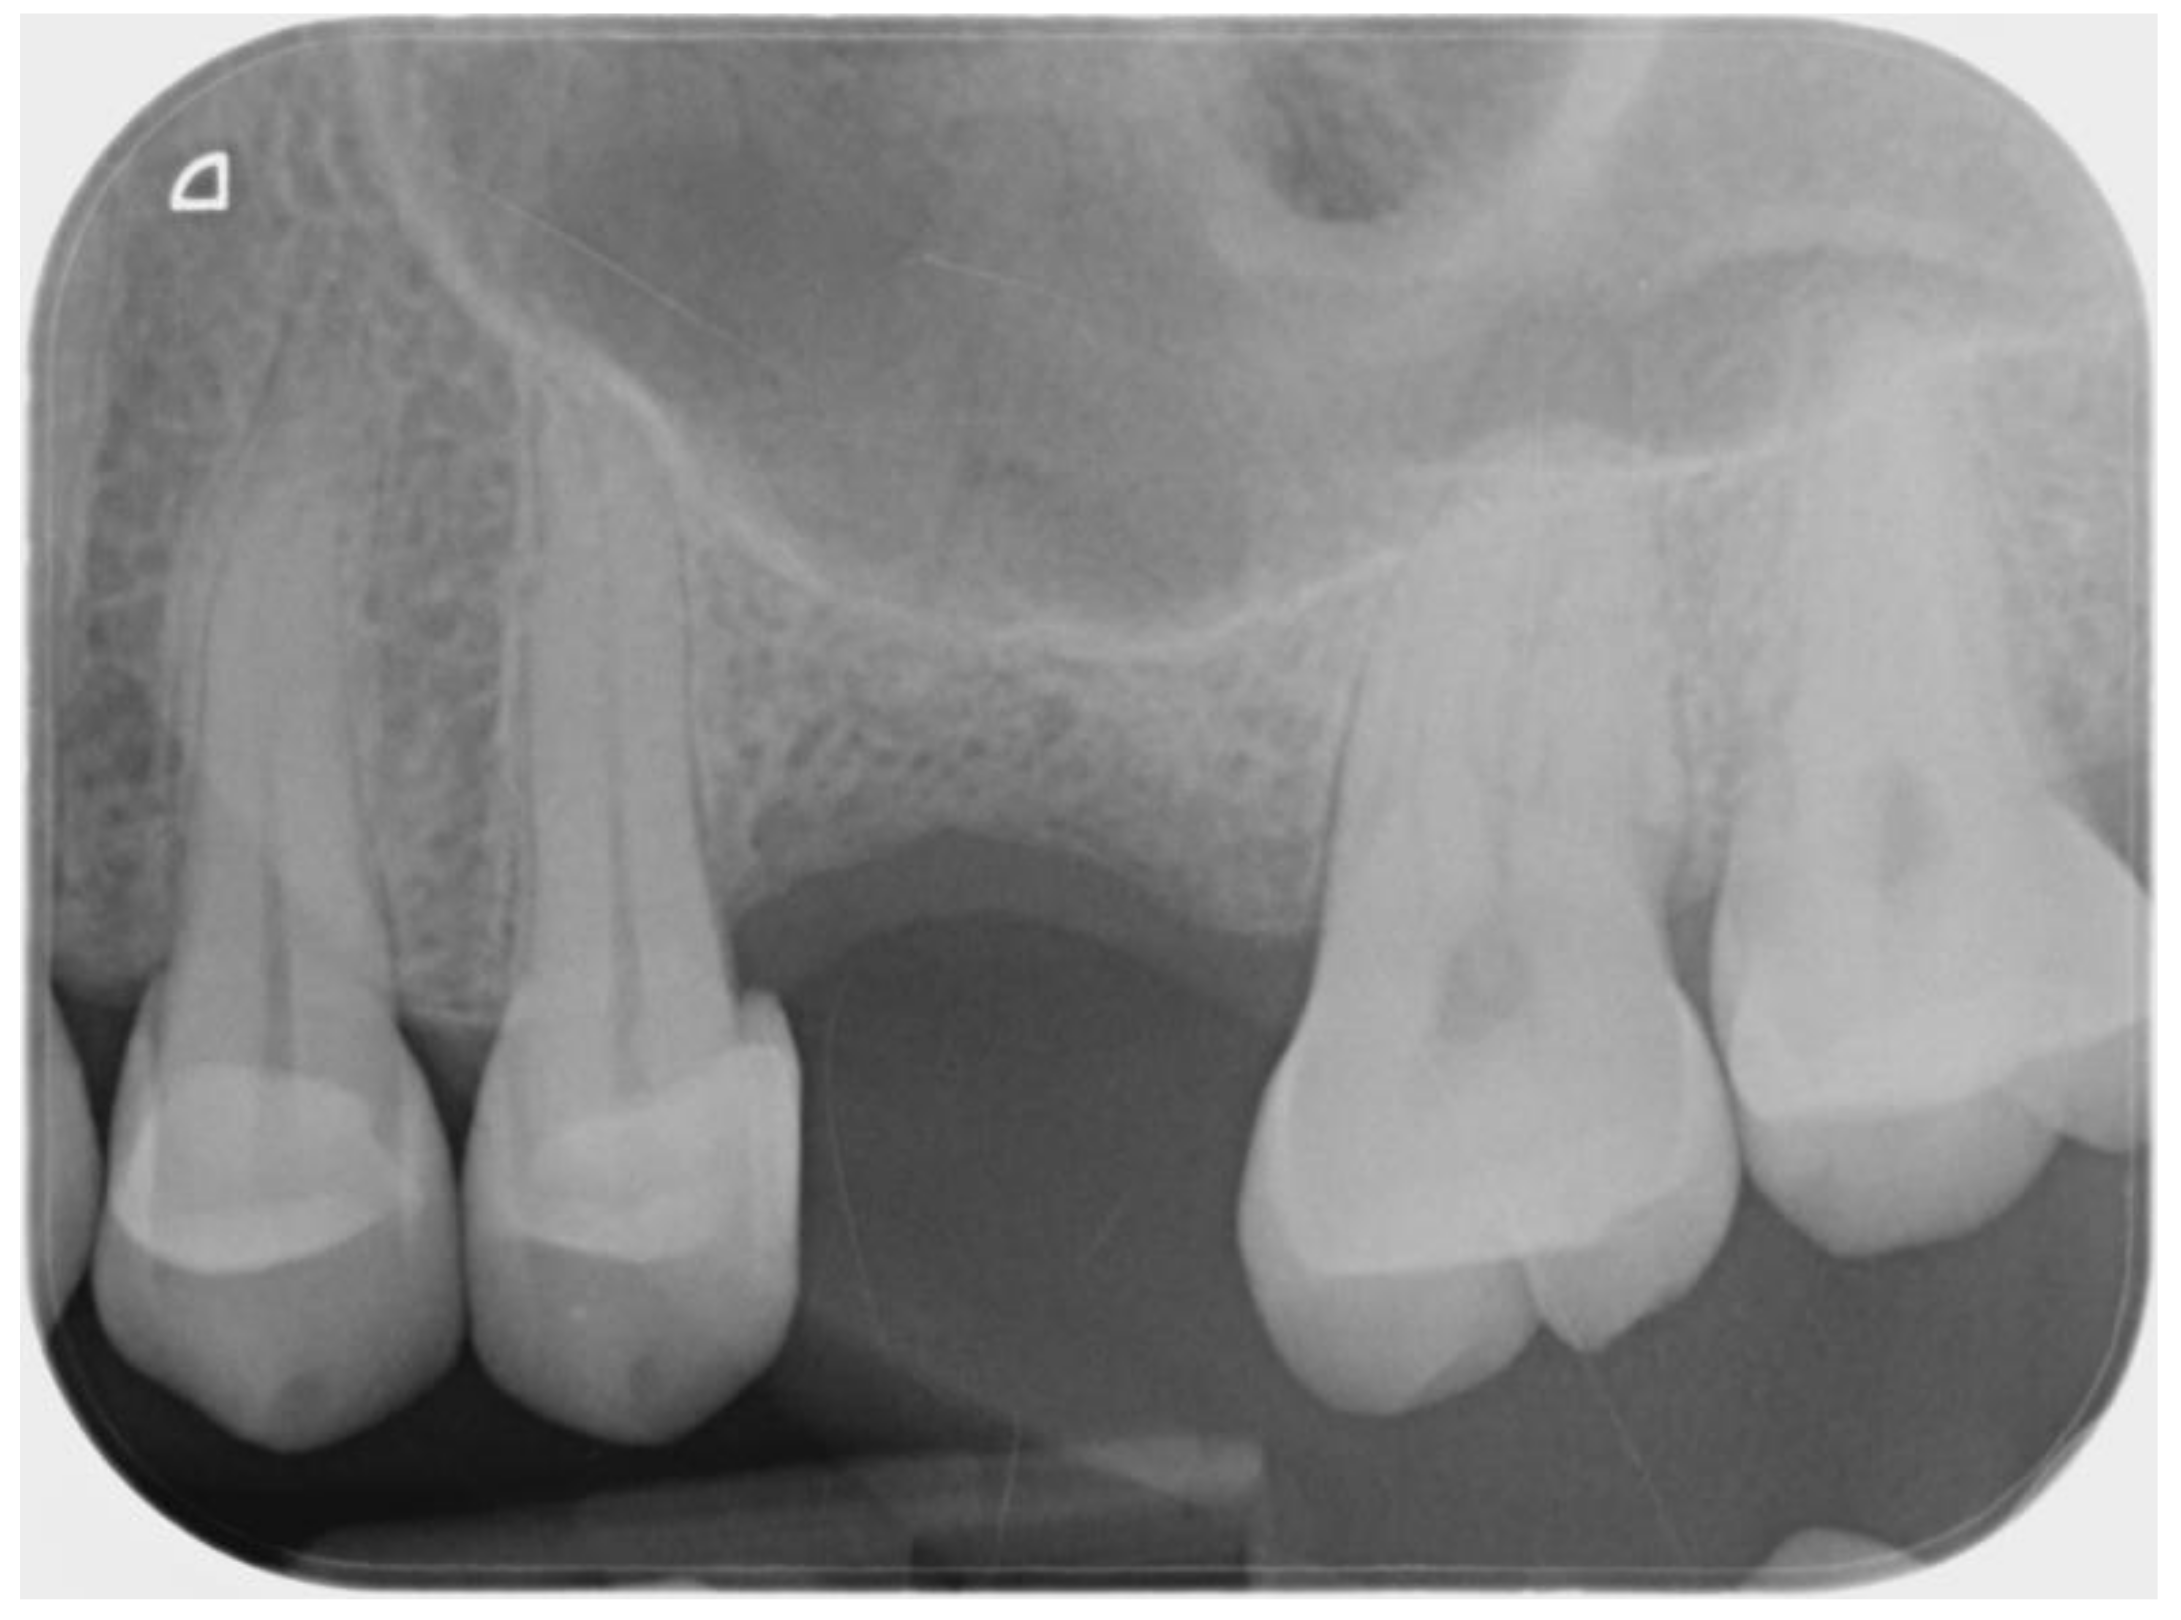 Elevation an d d ecreasing water F level vs. dental caries in seven